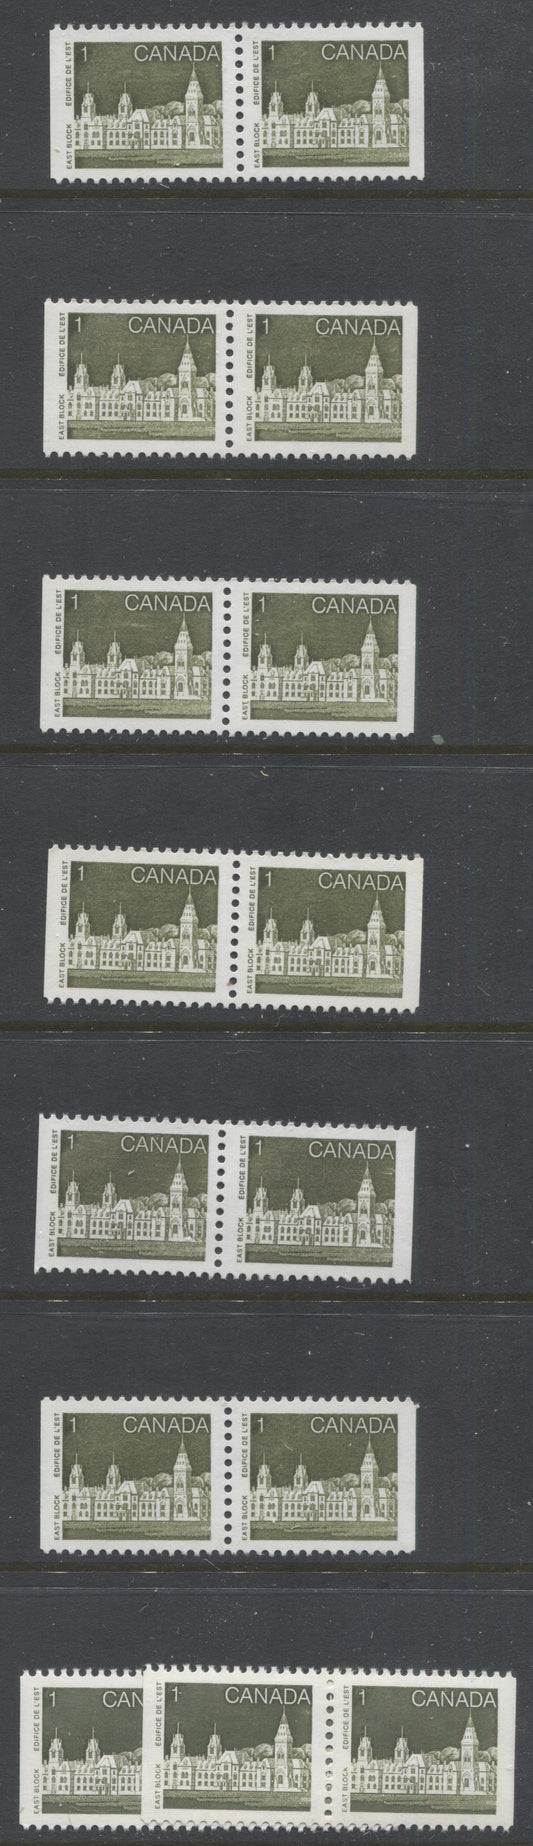 Lot 383 Canada #938, 938iv, 938v, 938i, 938iii 1c Sage Green Parliament Buildings, 1982-1987 Artifacts & National Parks Issue, 8 VFNH Booklet Pairs, NF/NF to HF/HF, Rolland & Harrison Papers